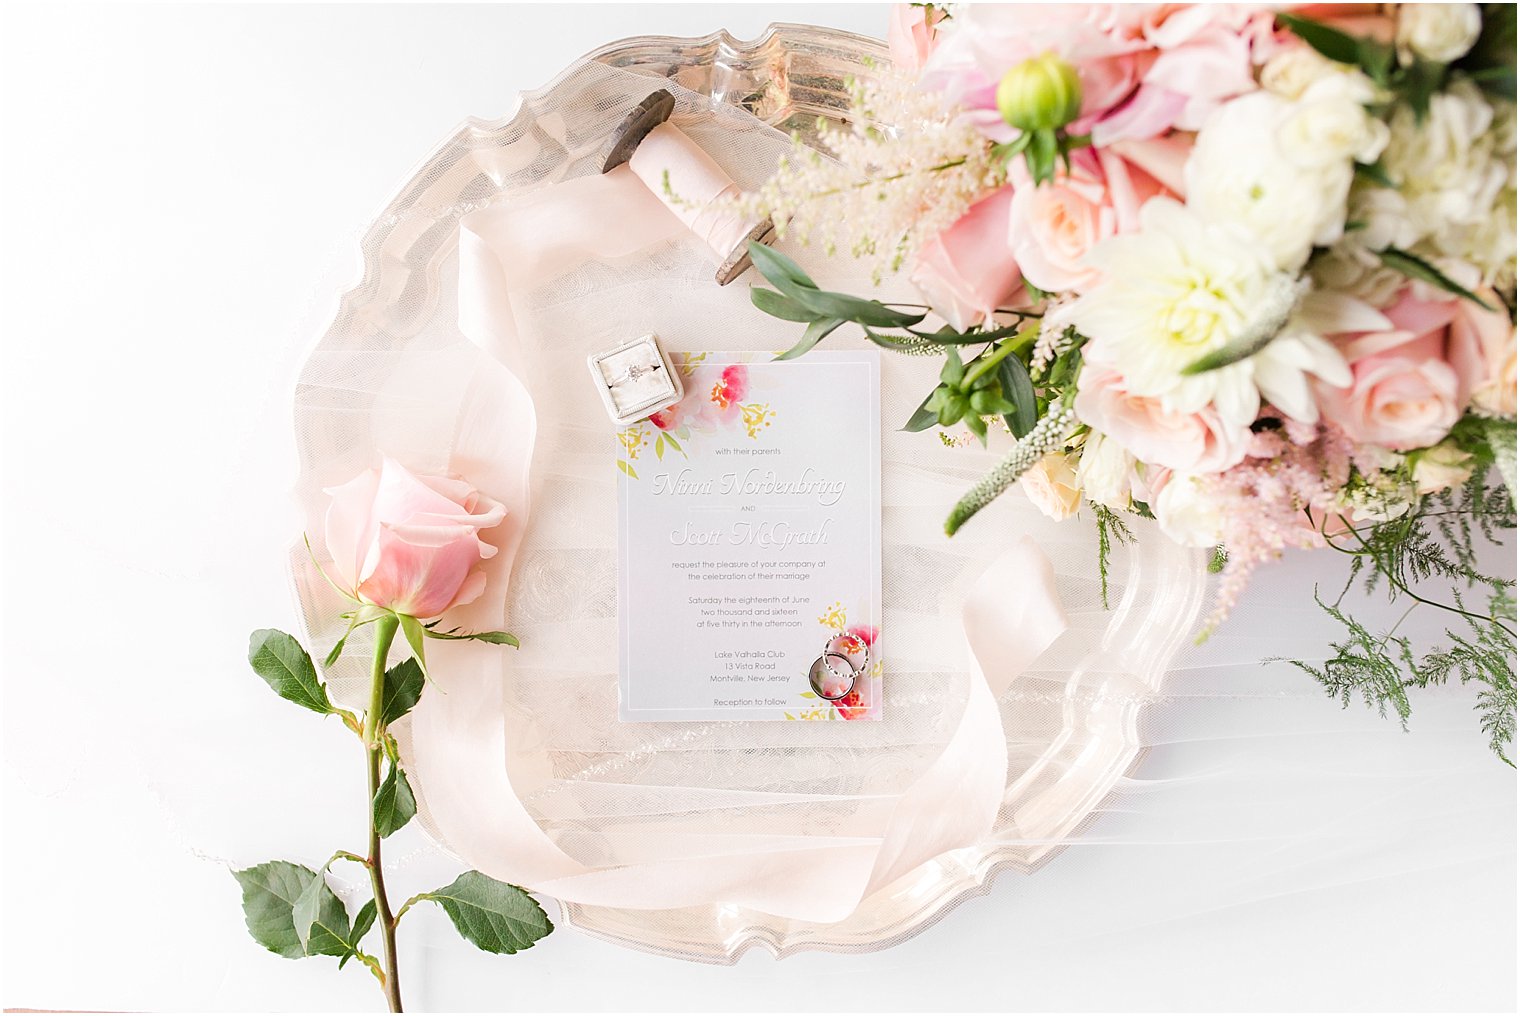 Invitations by Michele Blackwell and Florals by Louisa Amabile Testa